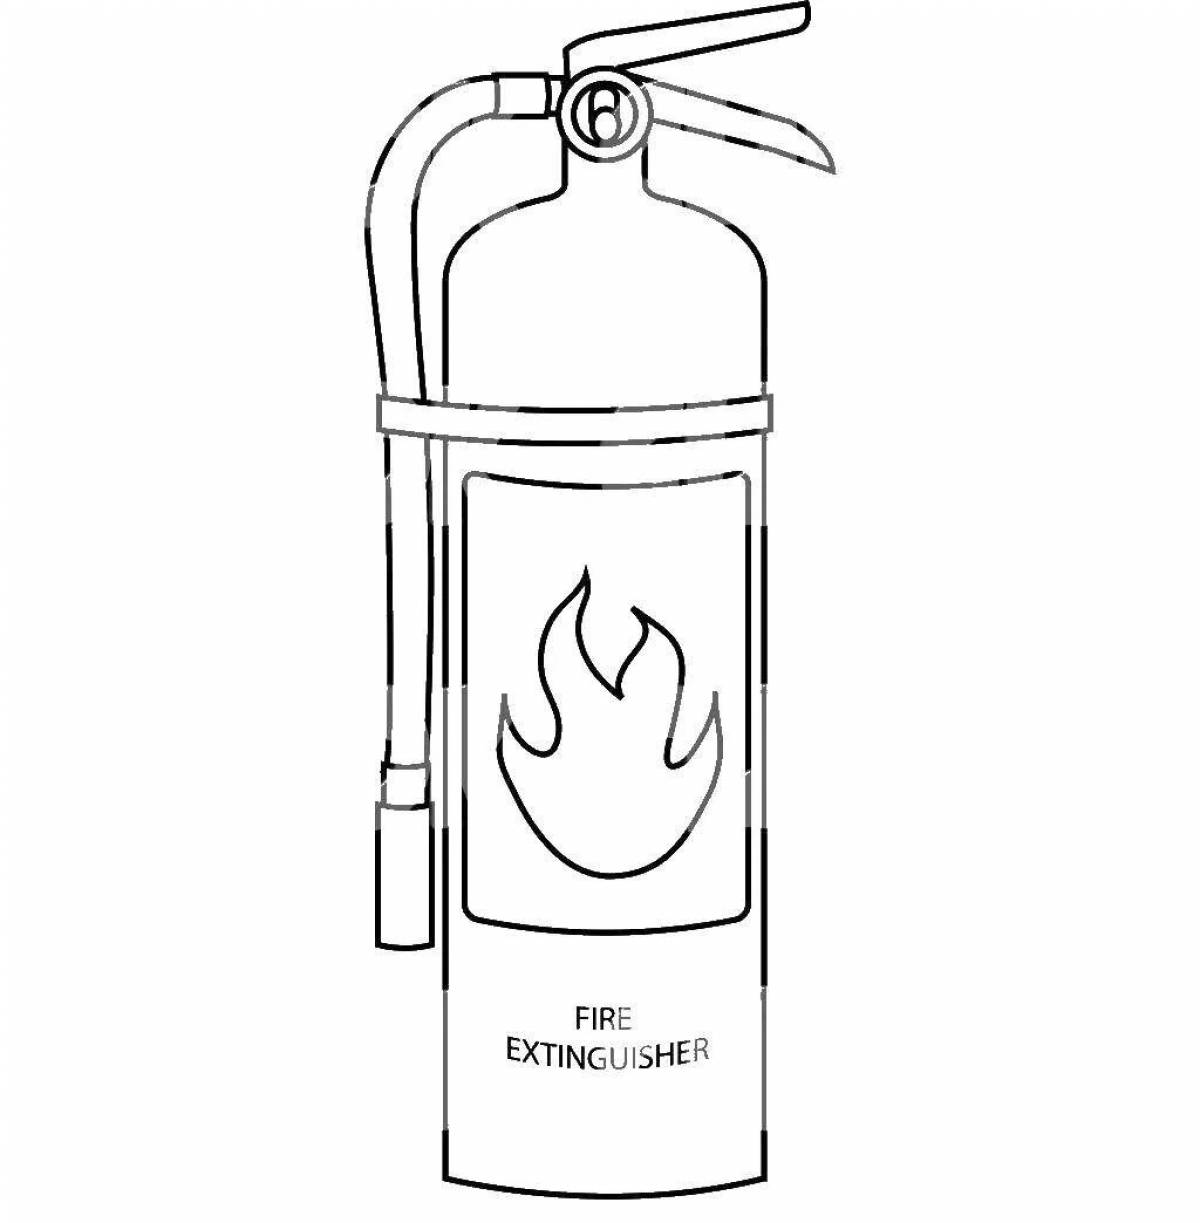 Pre-k fire extinguisher coloring page